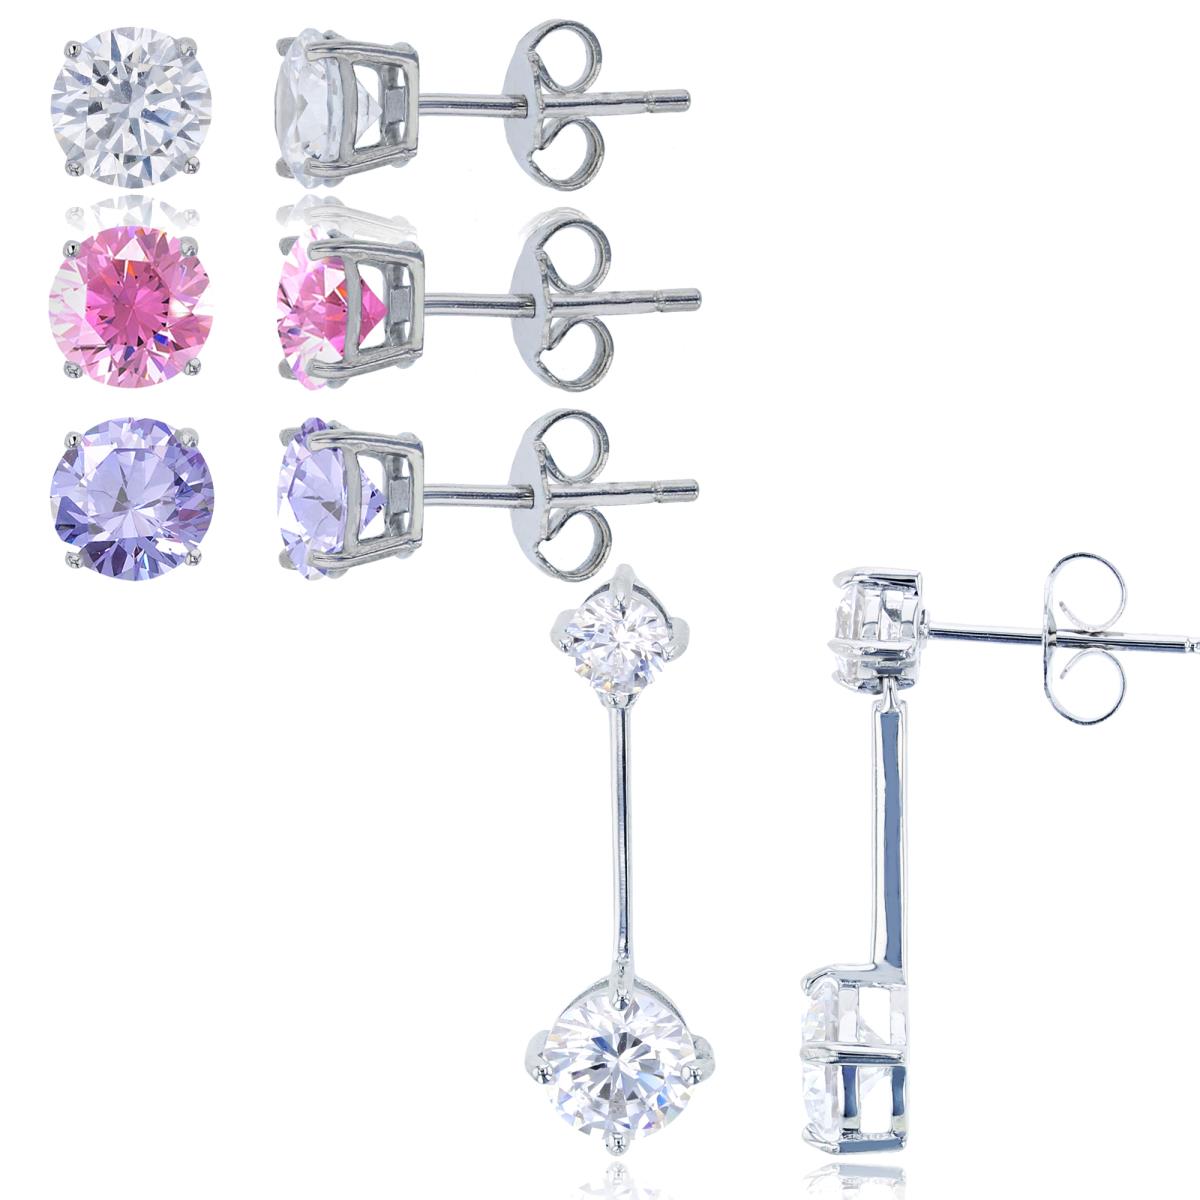 Sterling Silver Rhodium 6mm Bottom & 4mm Top Dngl with Pink,Lavender & White 6mm Rd Solitaire Stud Earring Set 